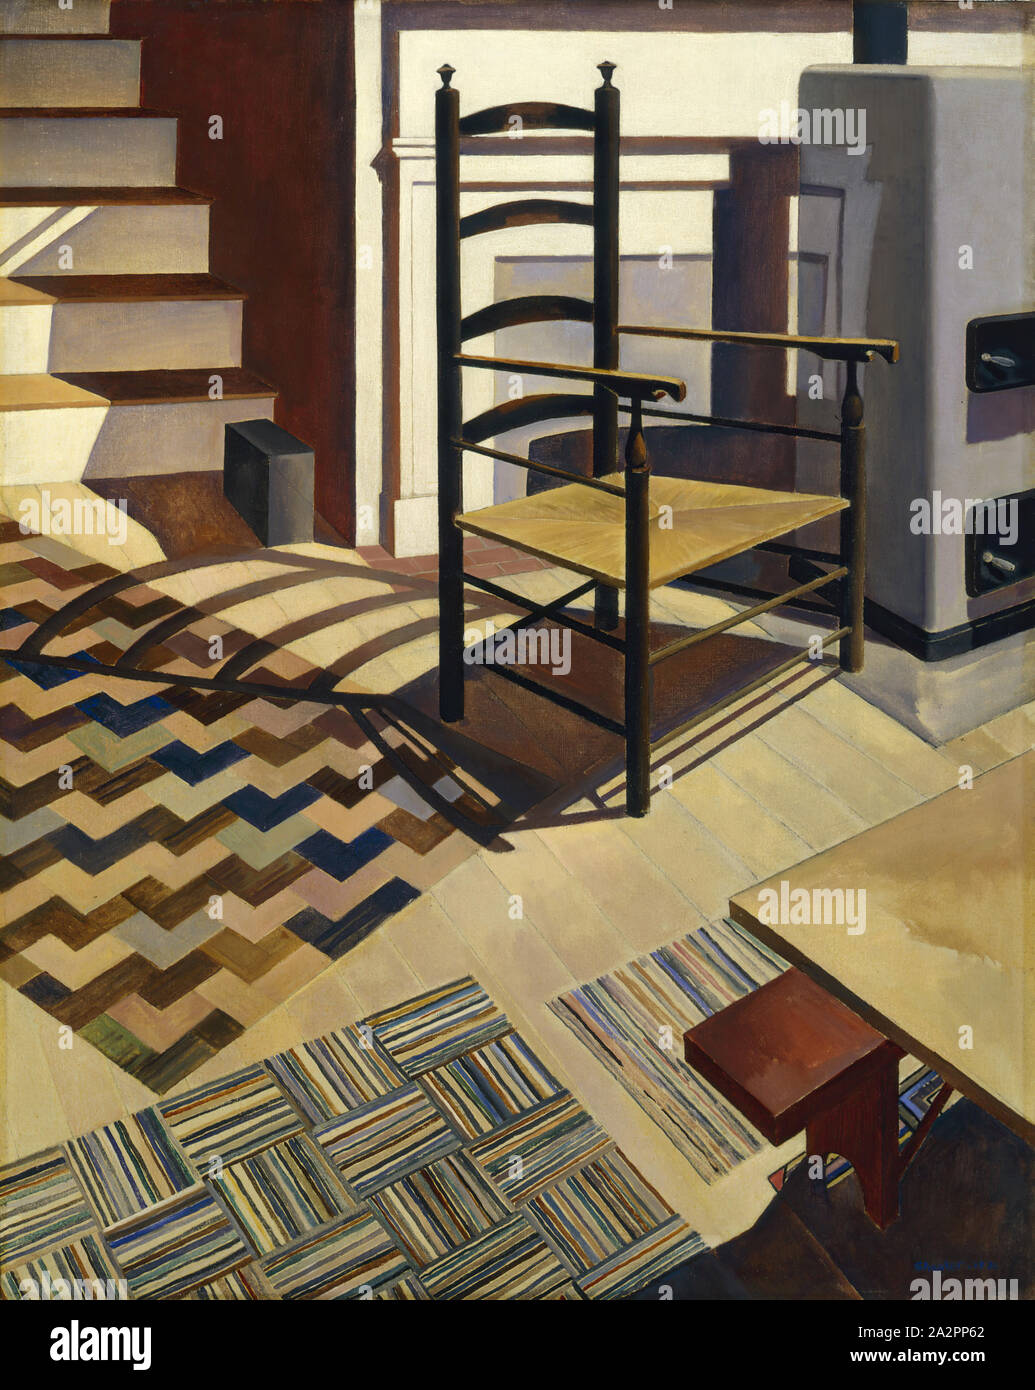 Charles Sheeler, American, 1883-1965, Home, Sweet Home, 1931, oil on canvas, Unframed: 36 × 29 inches (91.4 × 73.7 cm Stock Photo